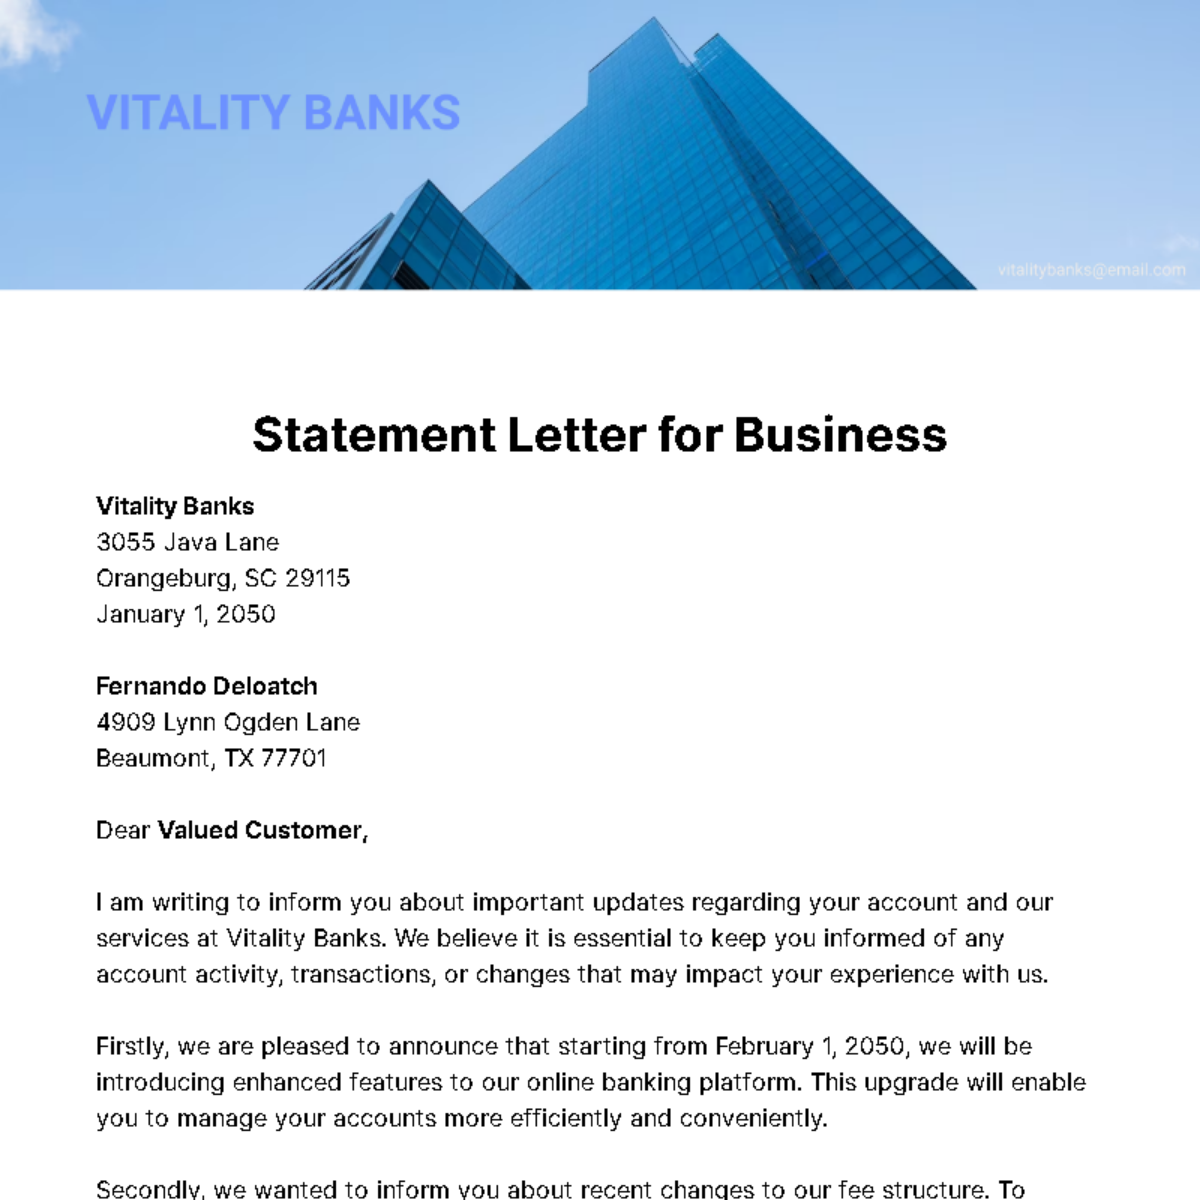 Statement Letter for Business Template